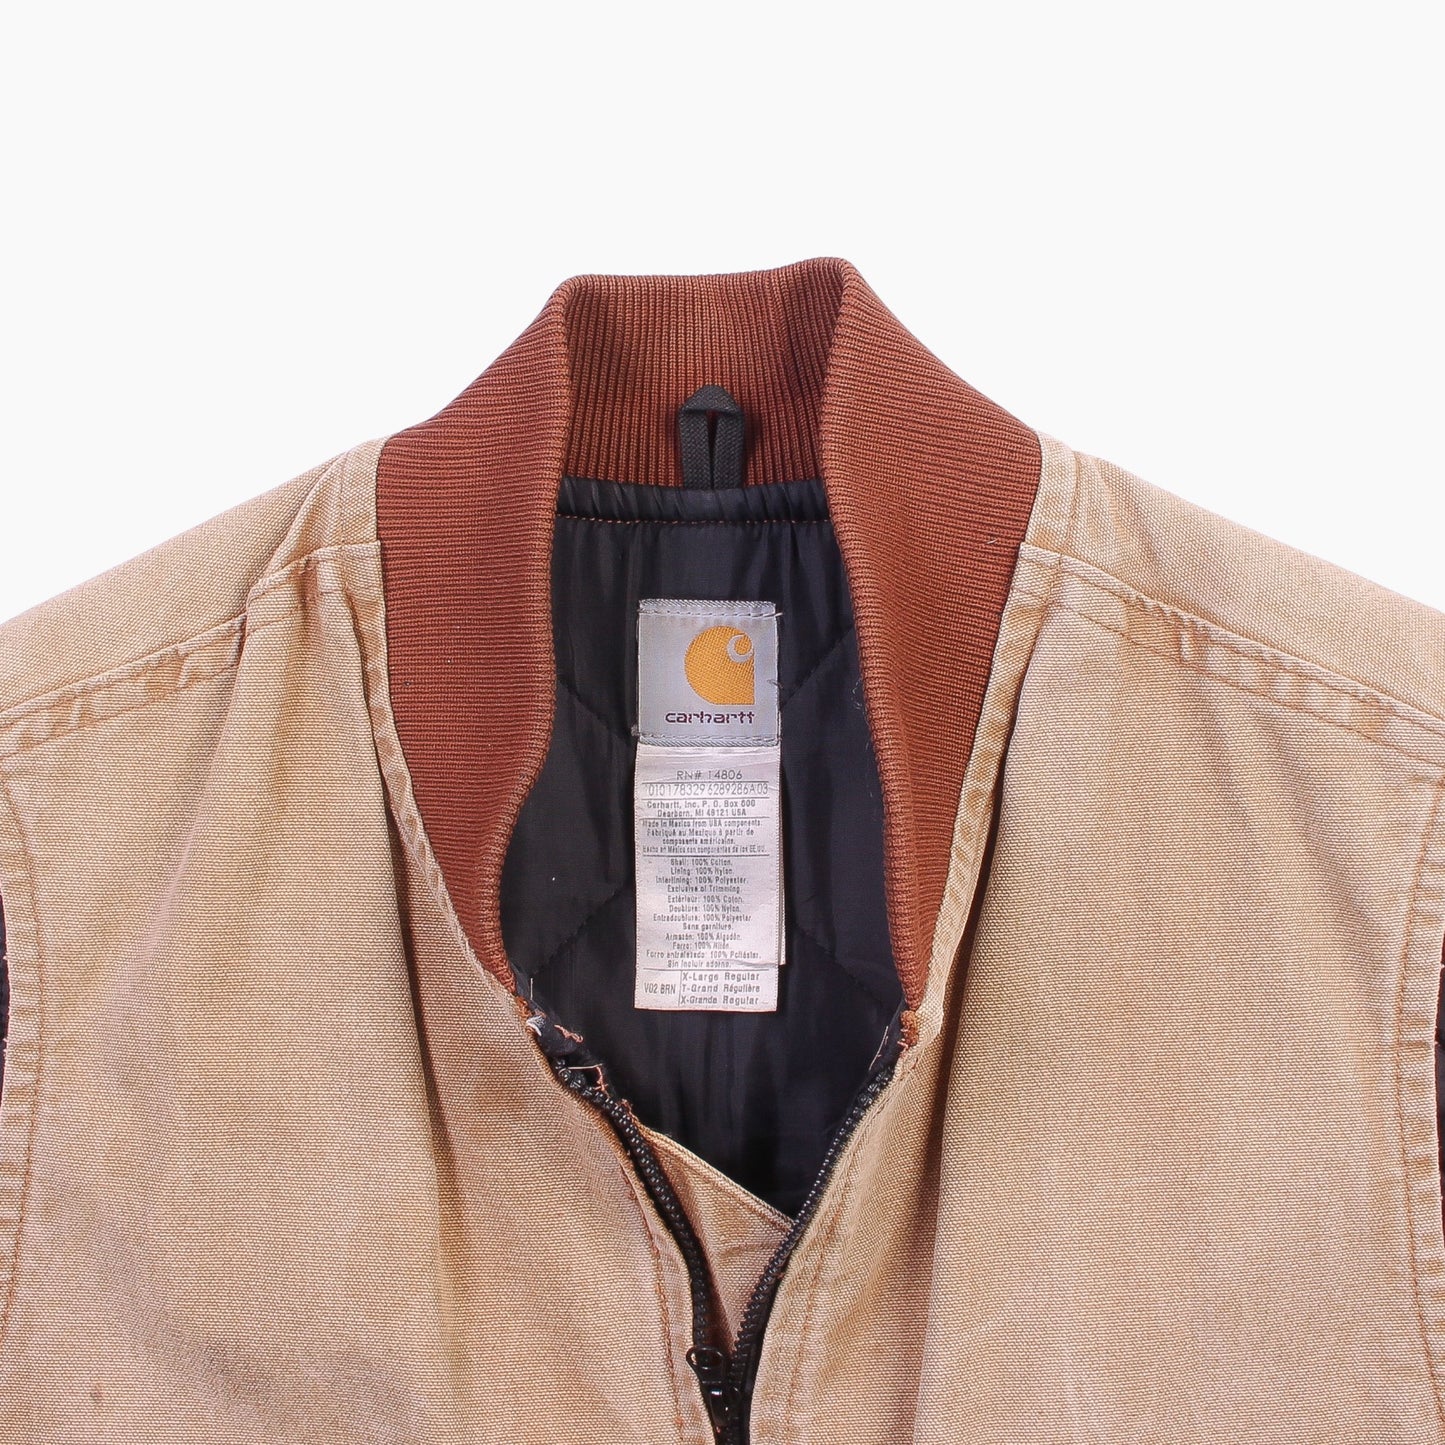 Lined Vest - Hamilton Brown - American Madness